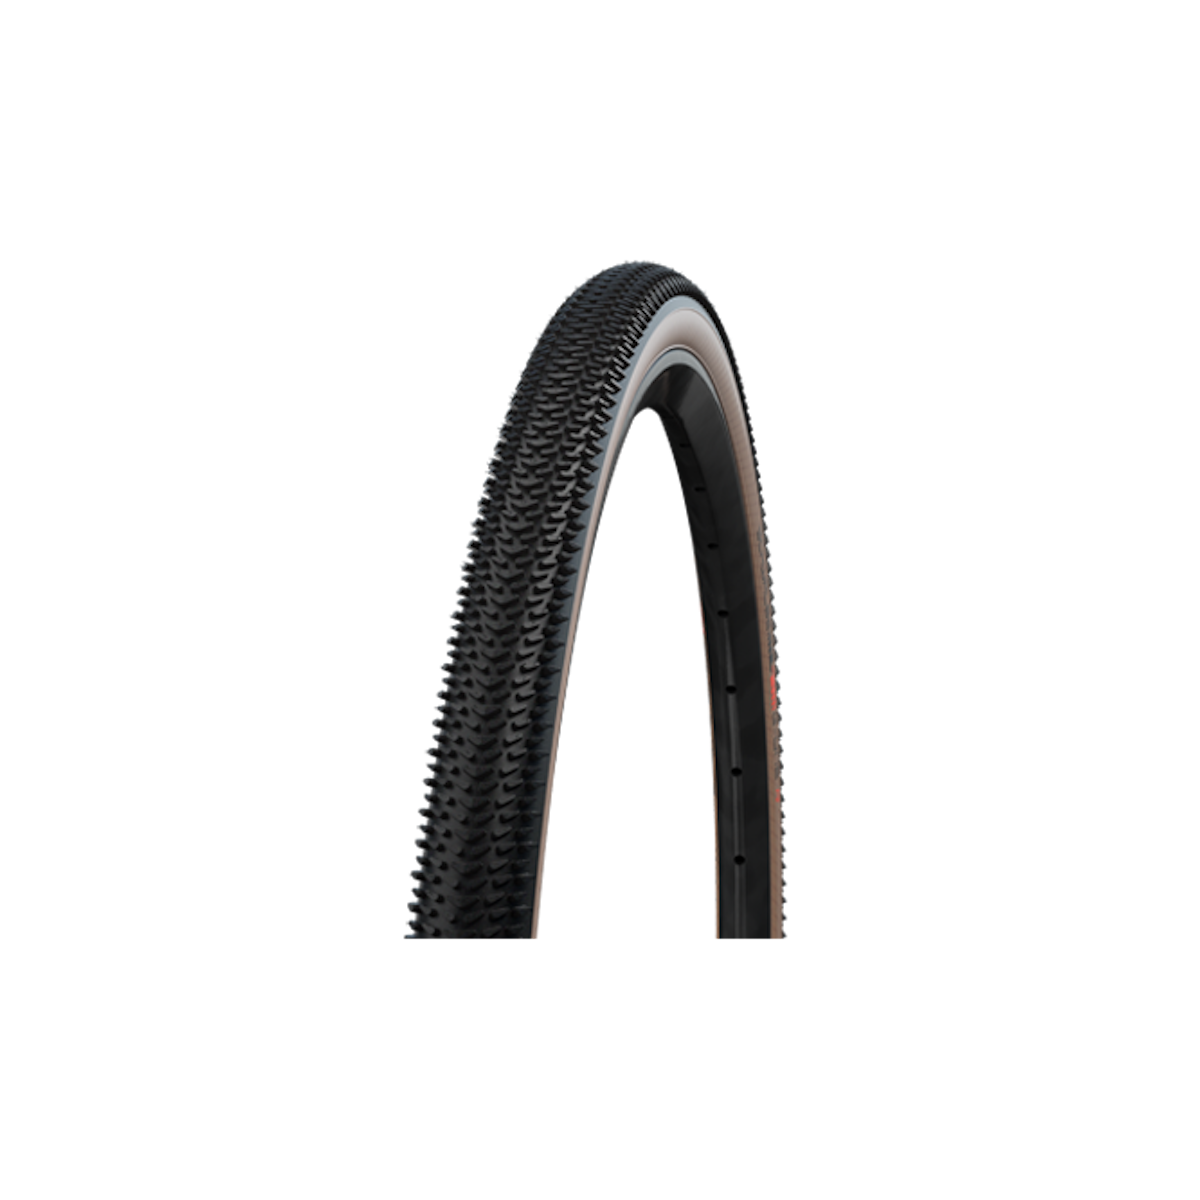 SCHWALBE G-ONE R 700 X 40C tubeless tyre